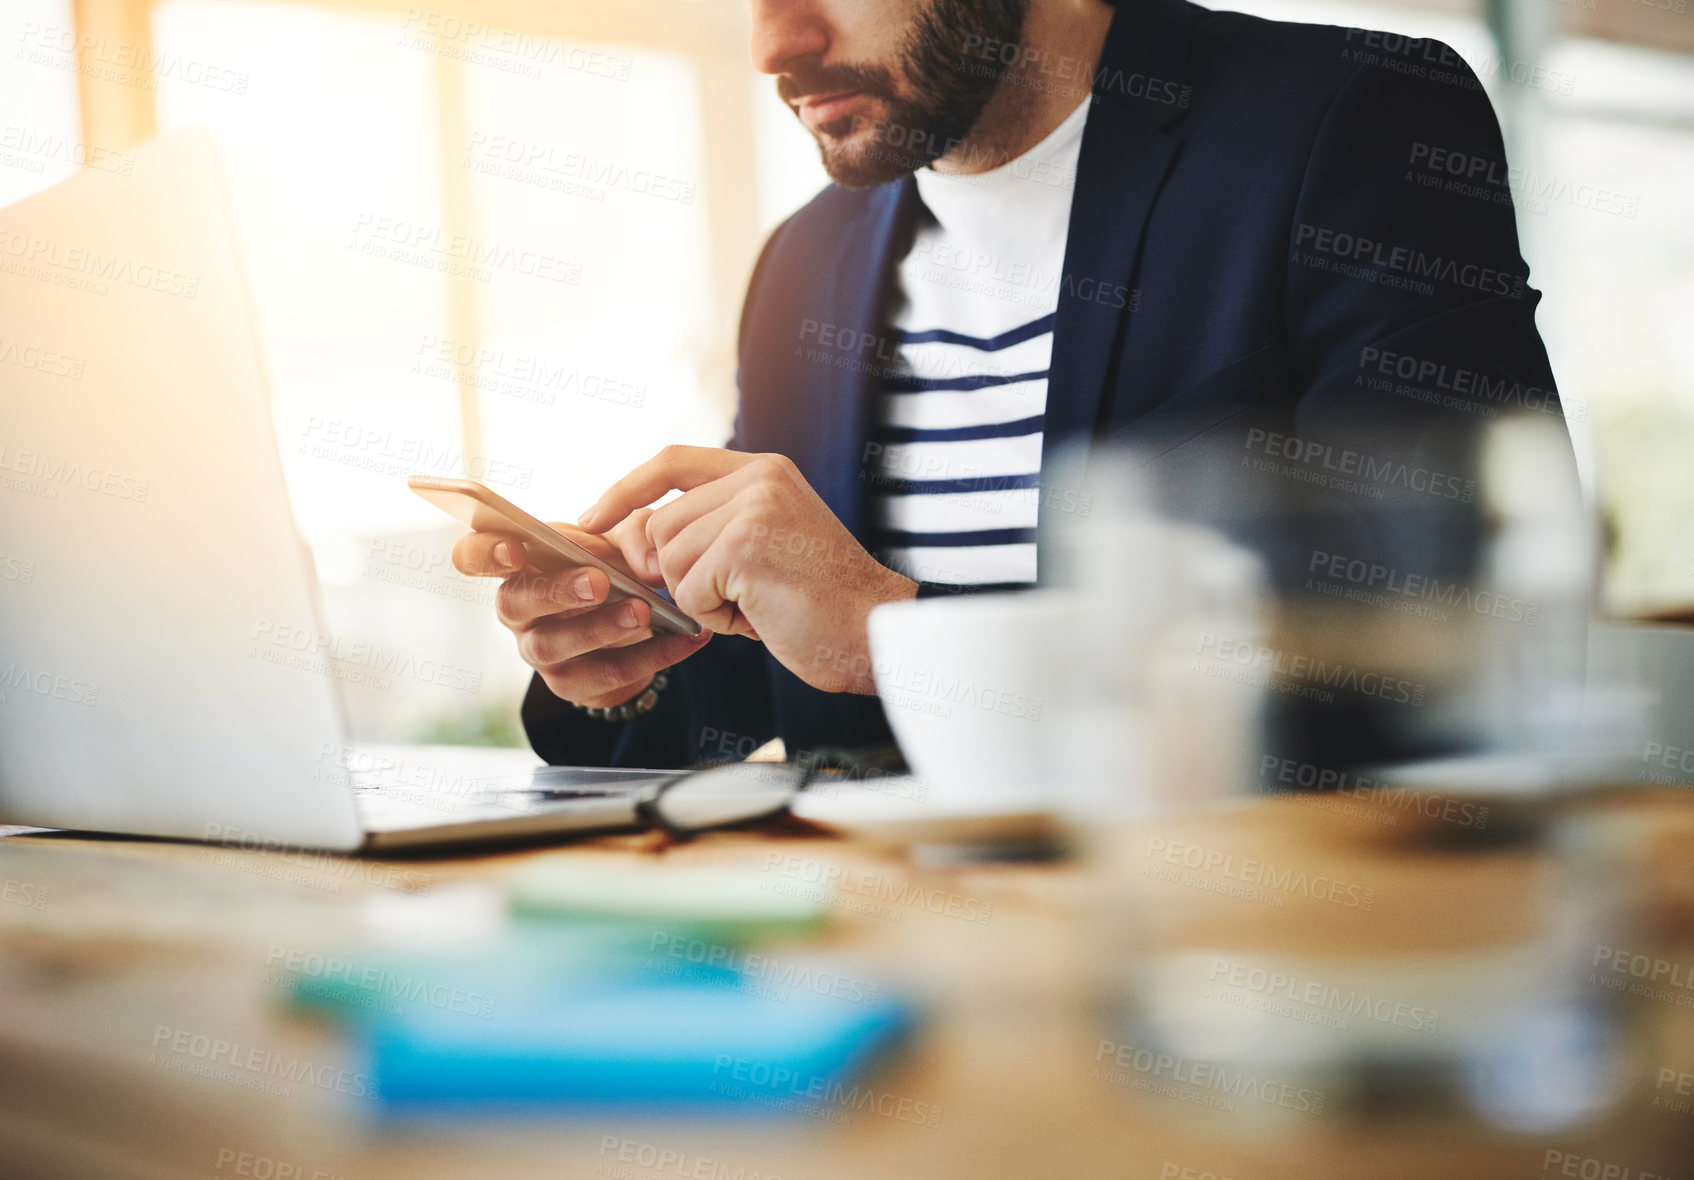 Buy stock photo Cropped shot of a young businessman using a mobile phone and laptop at his work desk